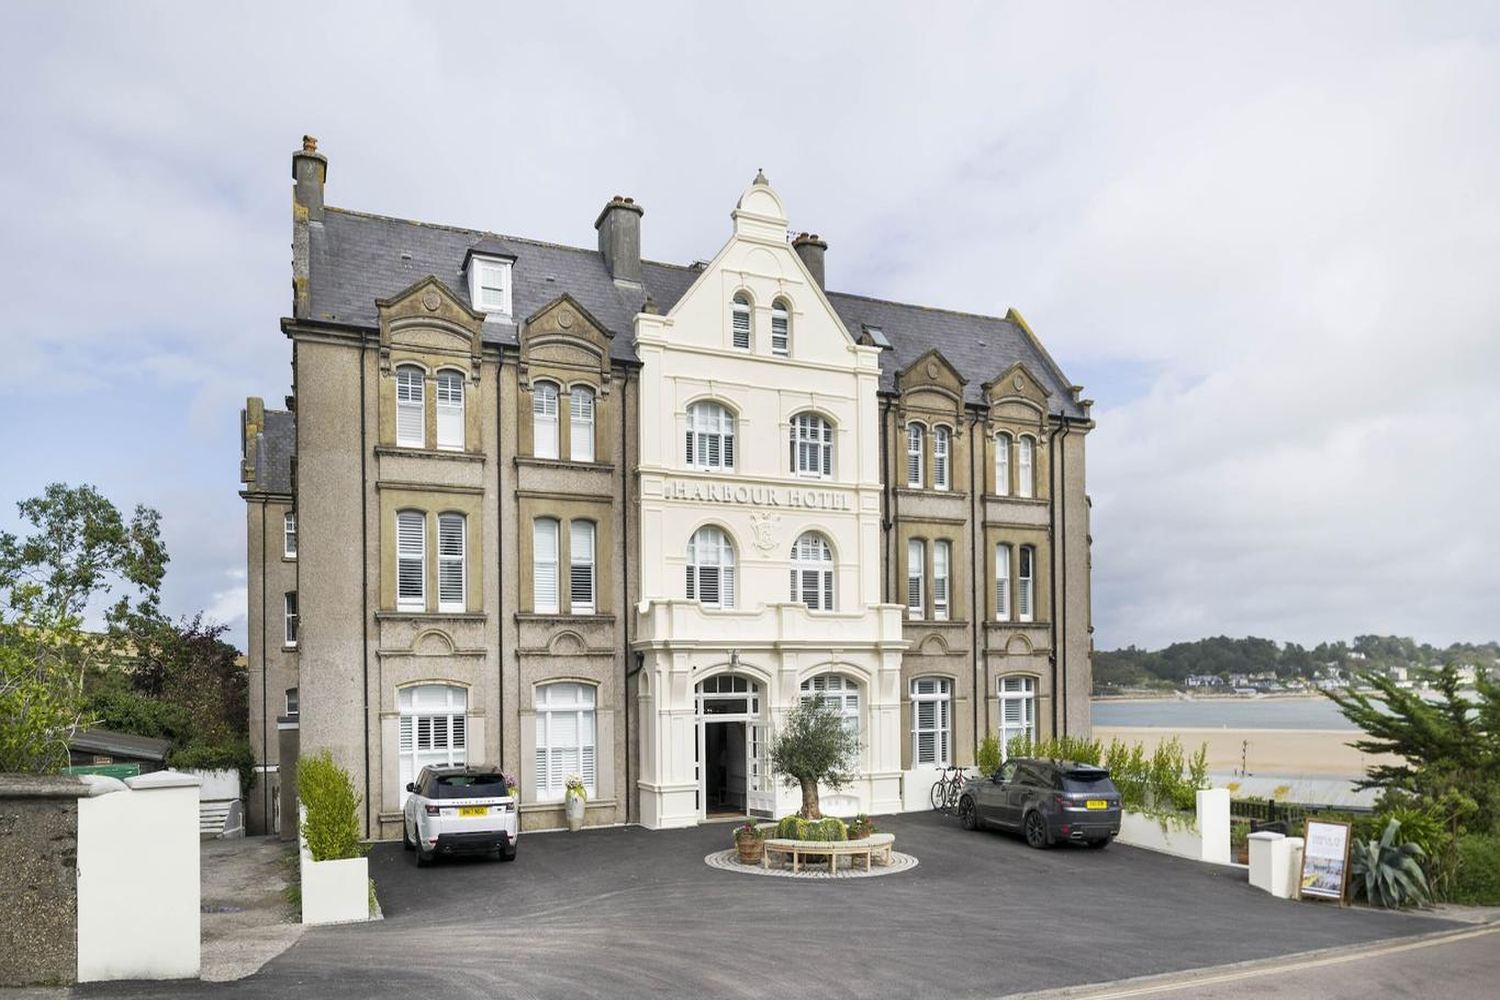 Padstow Harbour Hotel, Cornwall - England